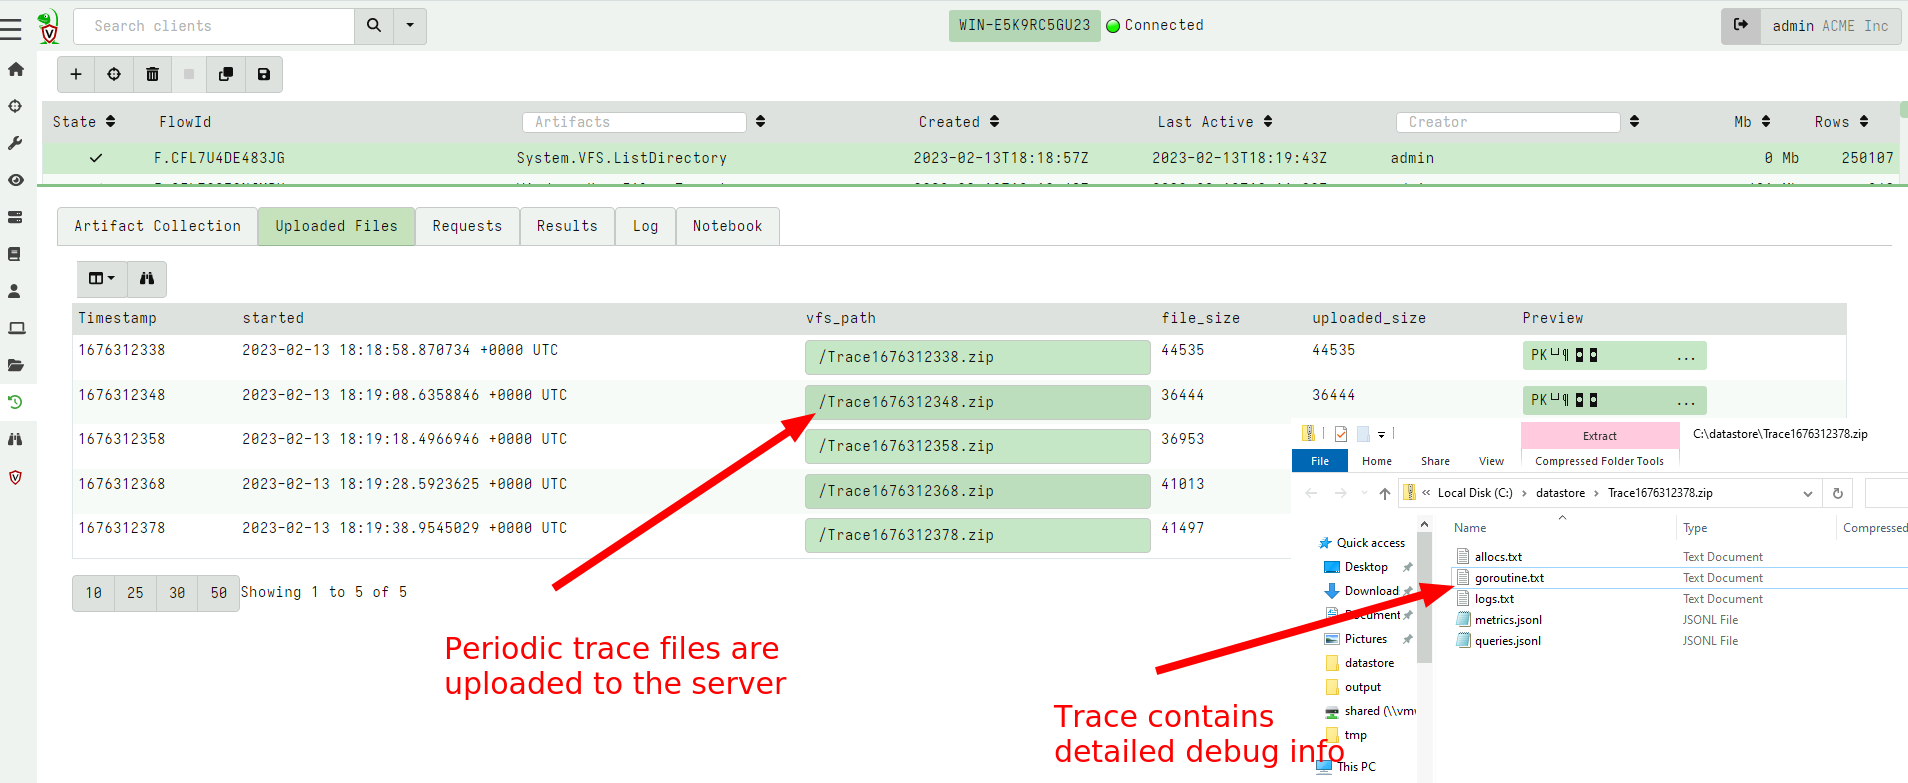 Trace files contain debugging information